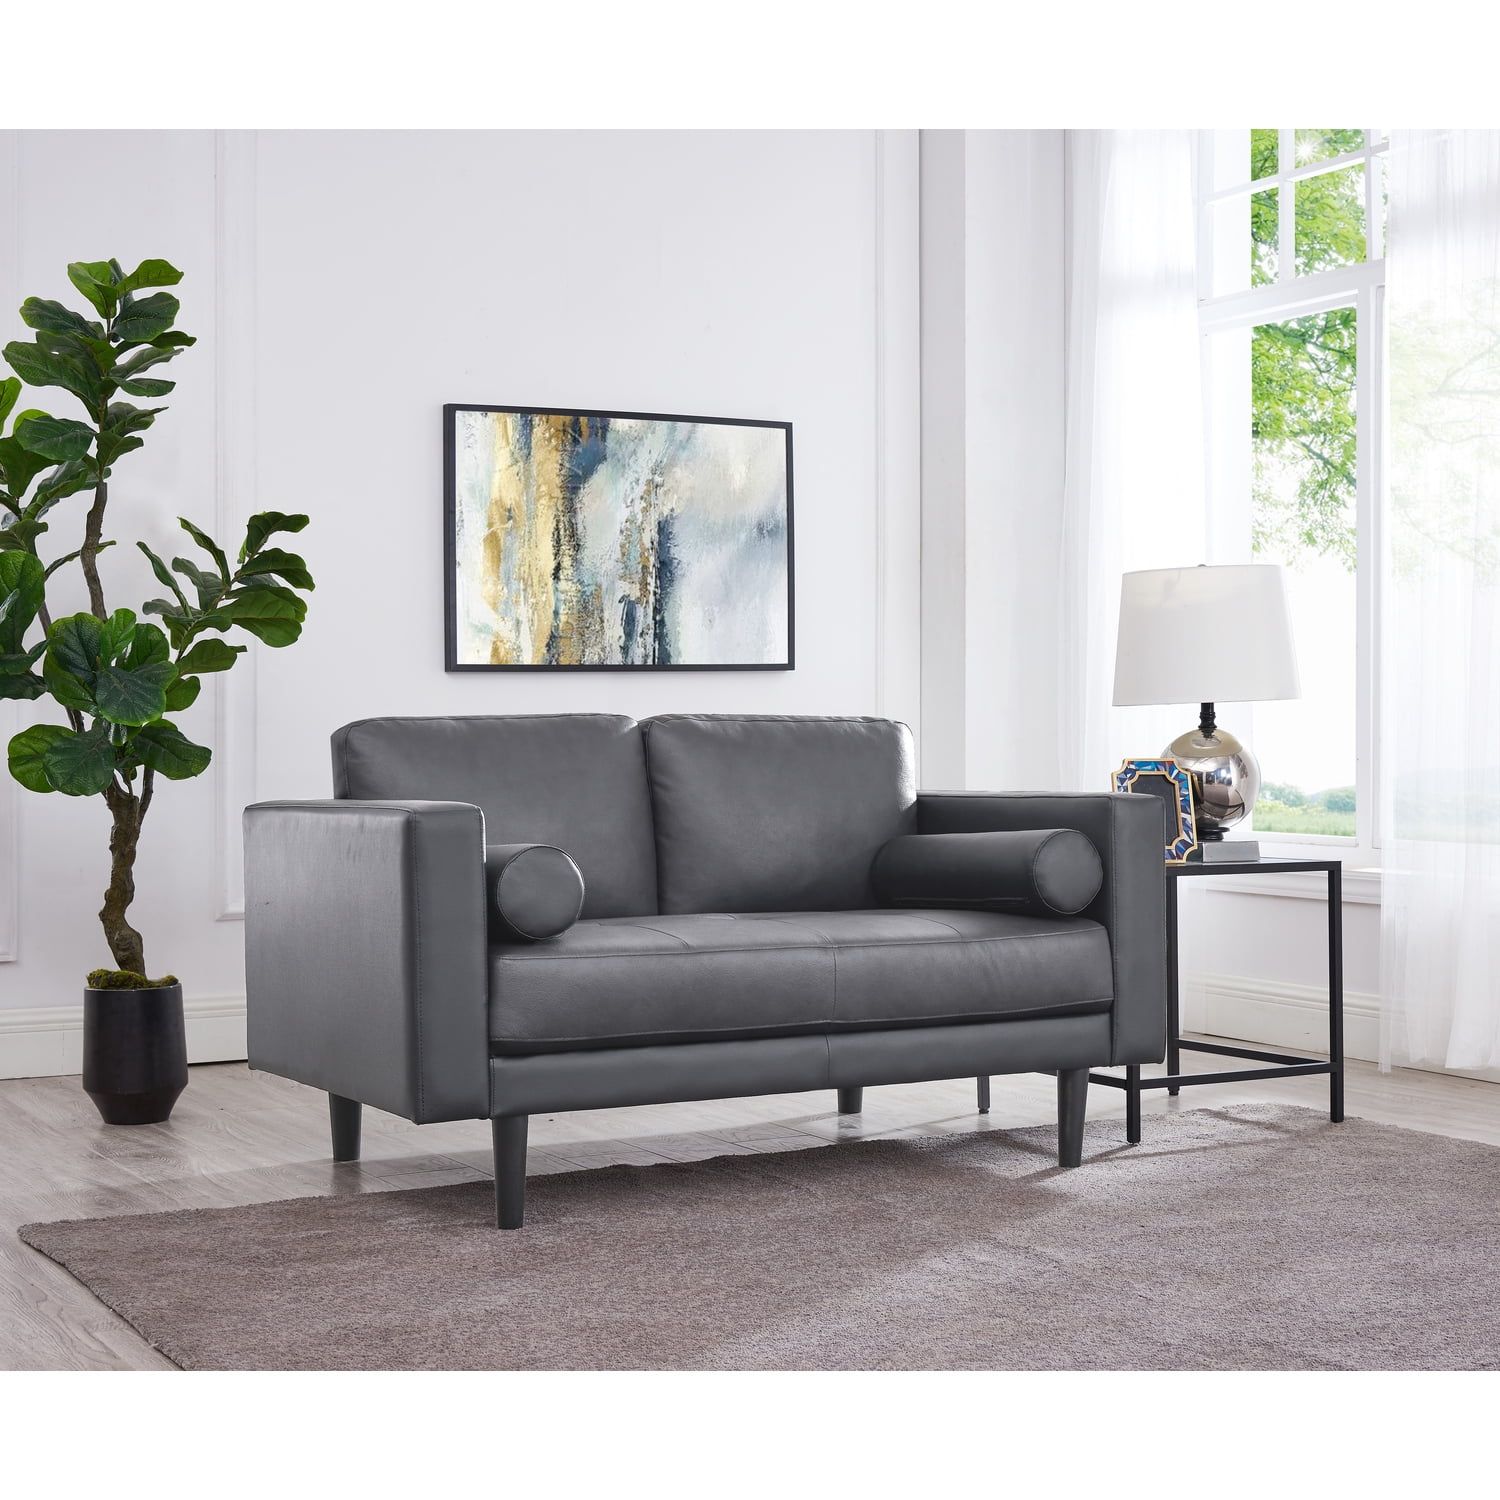 Modern Top Grain Leather Loveseat In Gray, Loveseat Sofa Couch For Bedroom,  Living Room Furniture, Space Saving 2 Seater Couch For Living Room,  Bedroom, Apartment, Small Spaces, Gray – Walmart Intended For Top Grain Leather Loveseats (View 5 of 15)